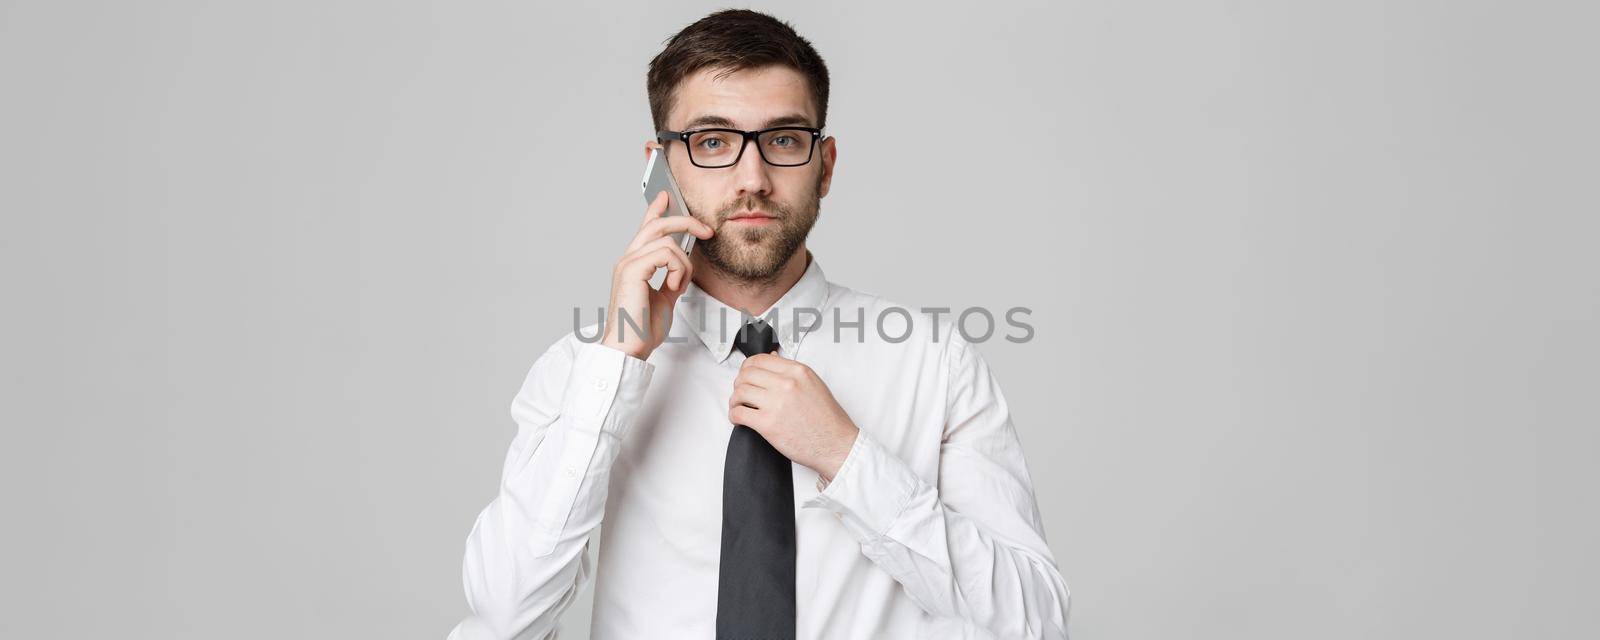 Lifestyle and Business Concept - Portrait of a handsome businessman serious talking with mobile phone. Isolated White background. Copy Space.